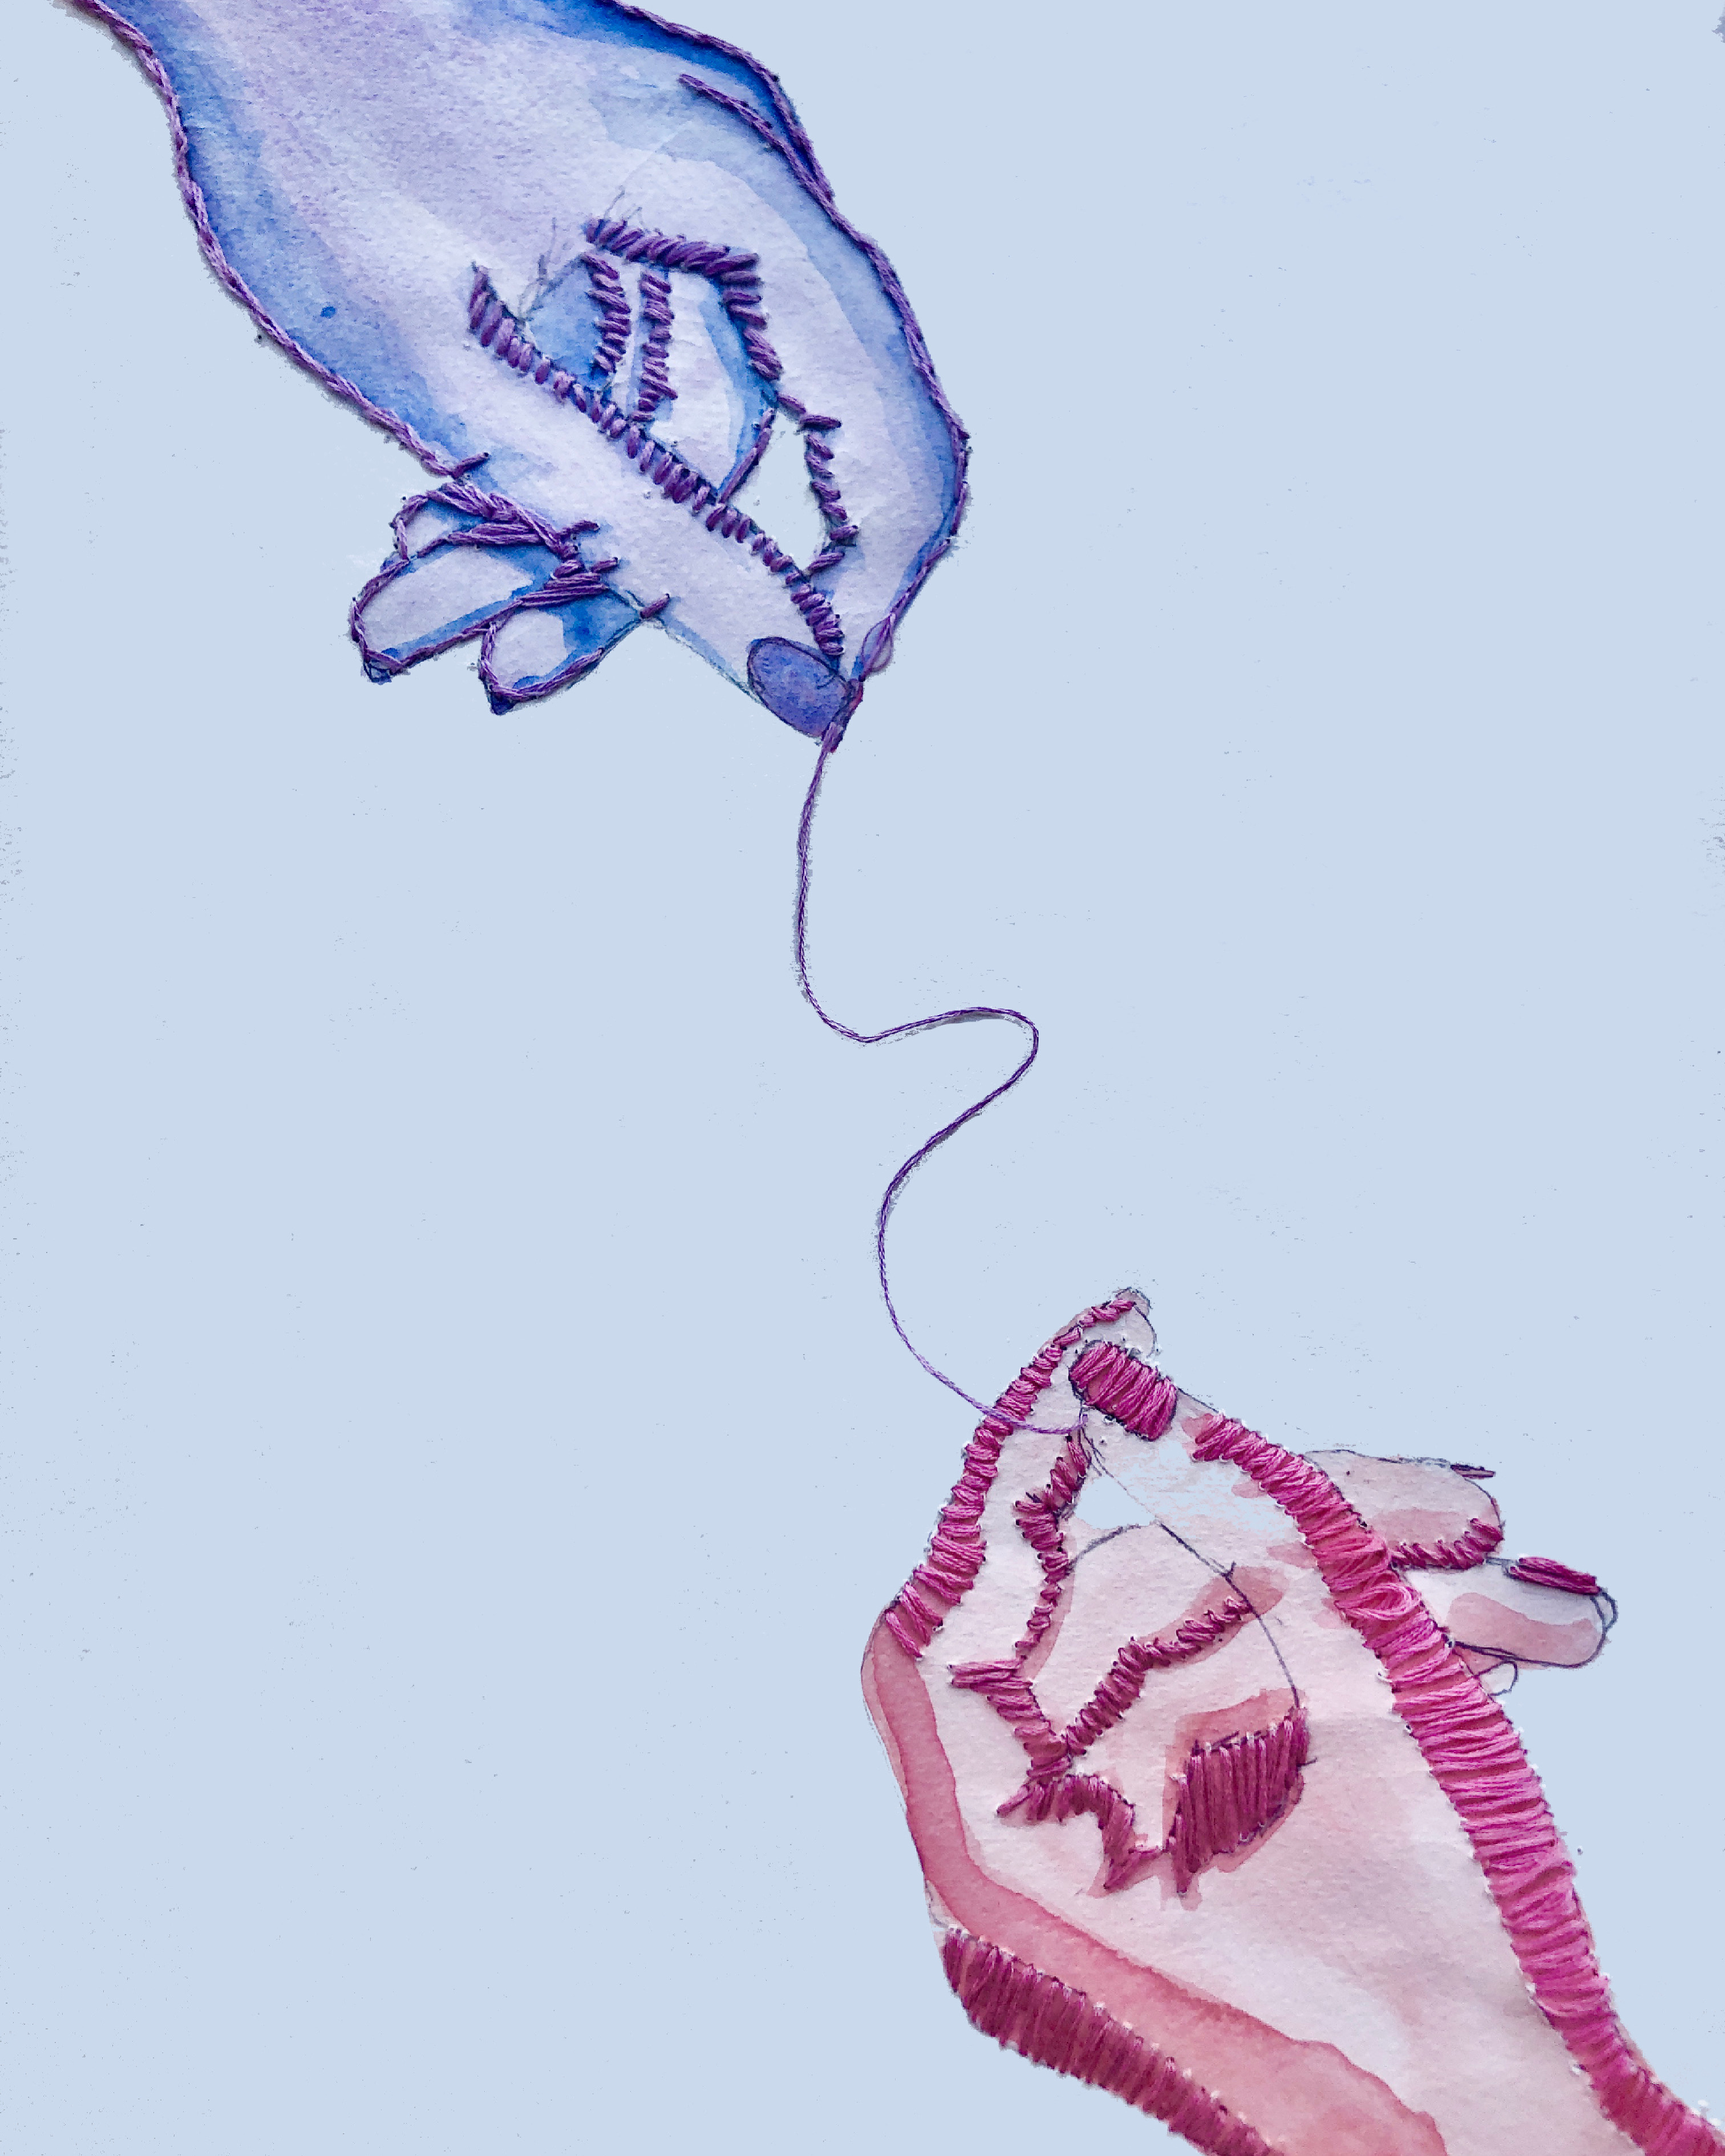 stitched image of hands